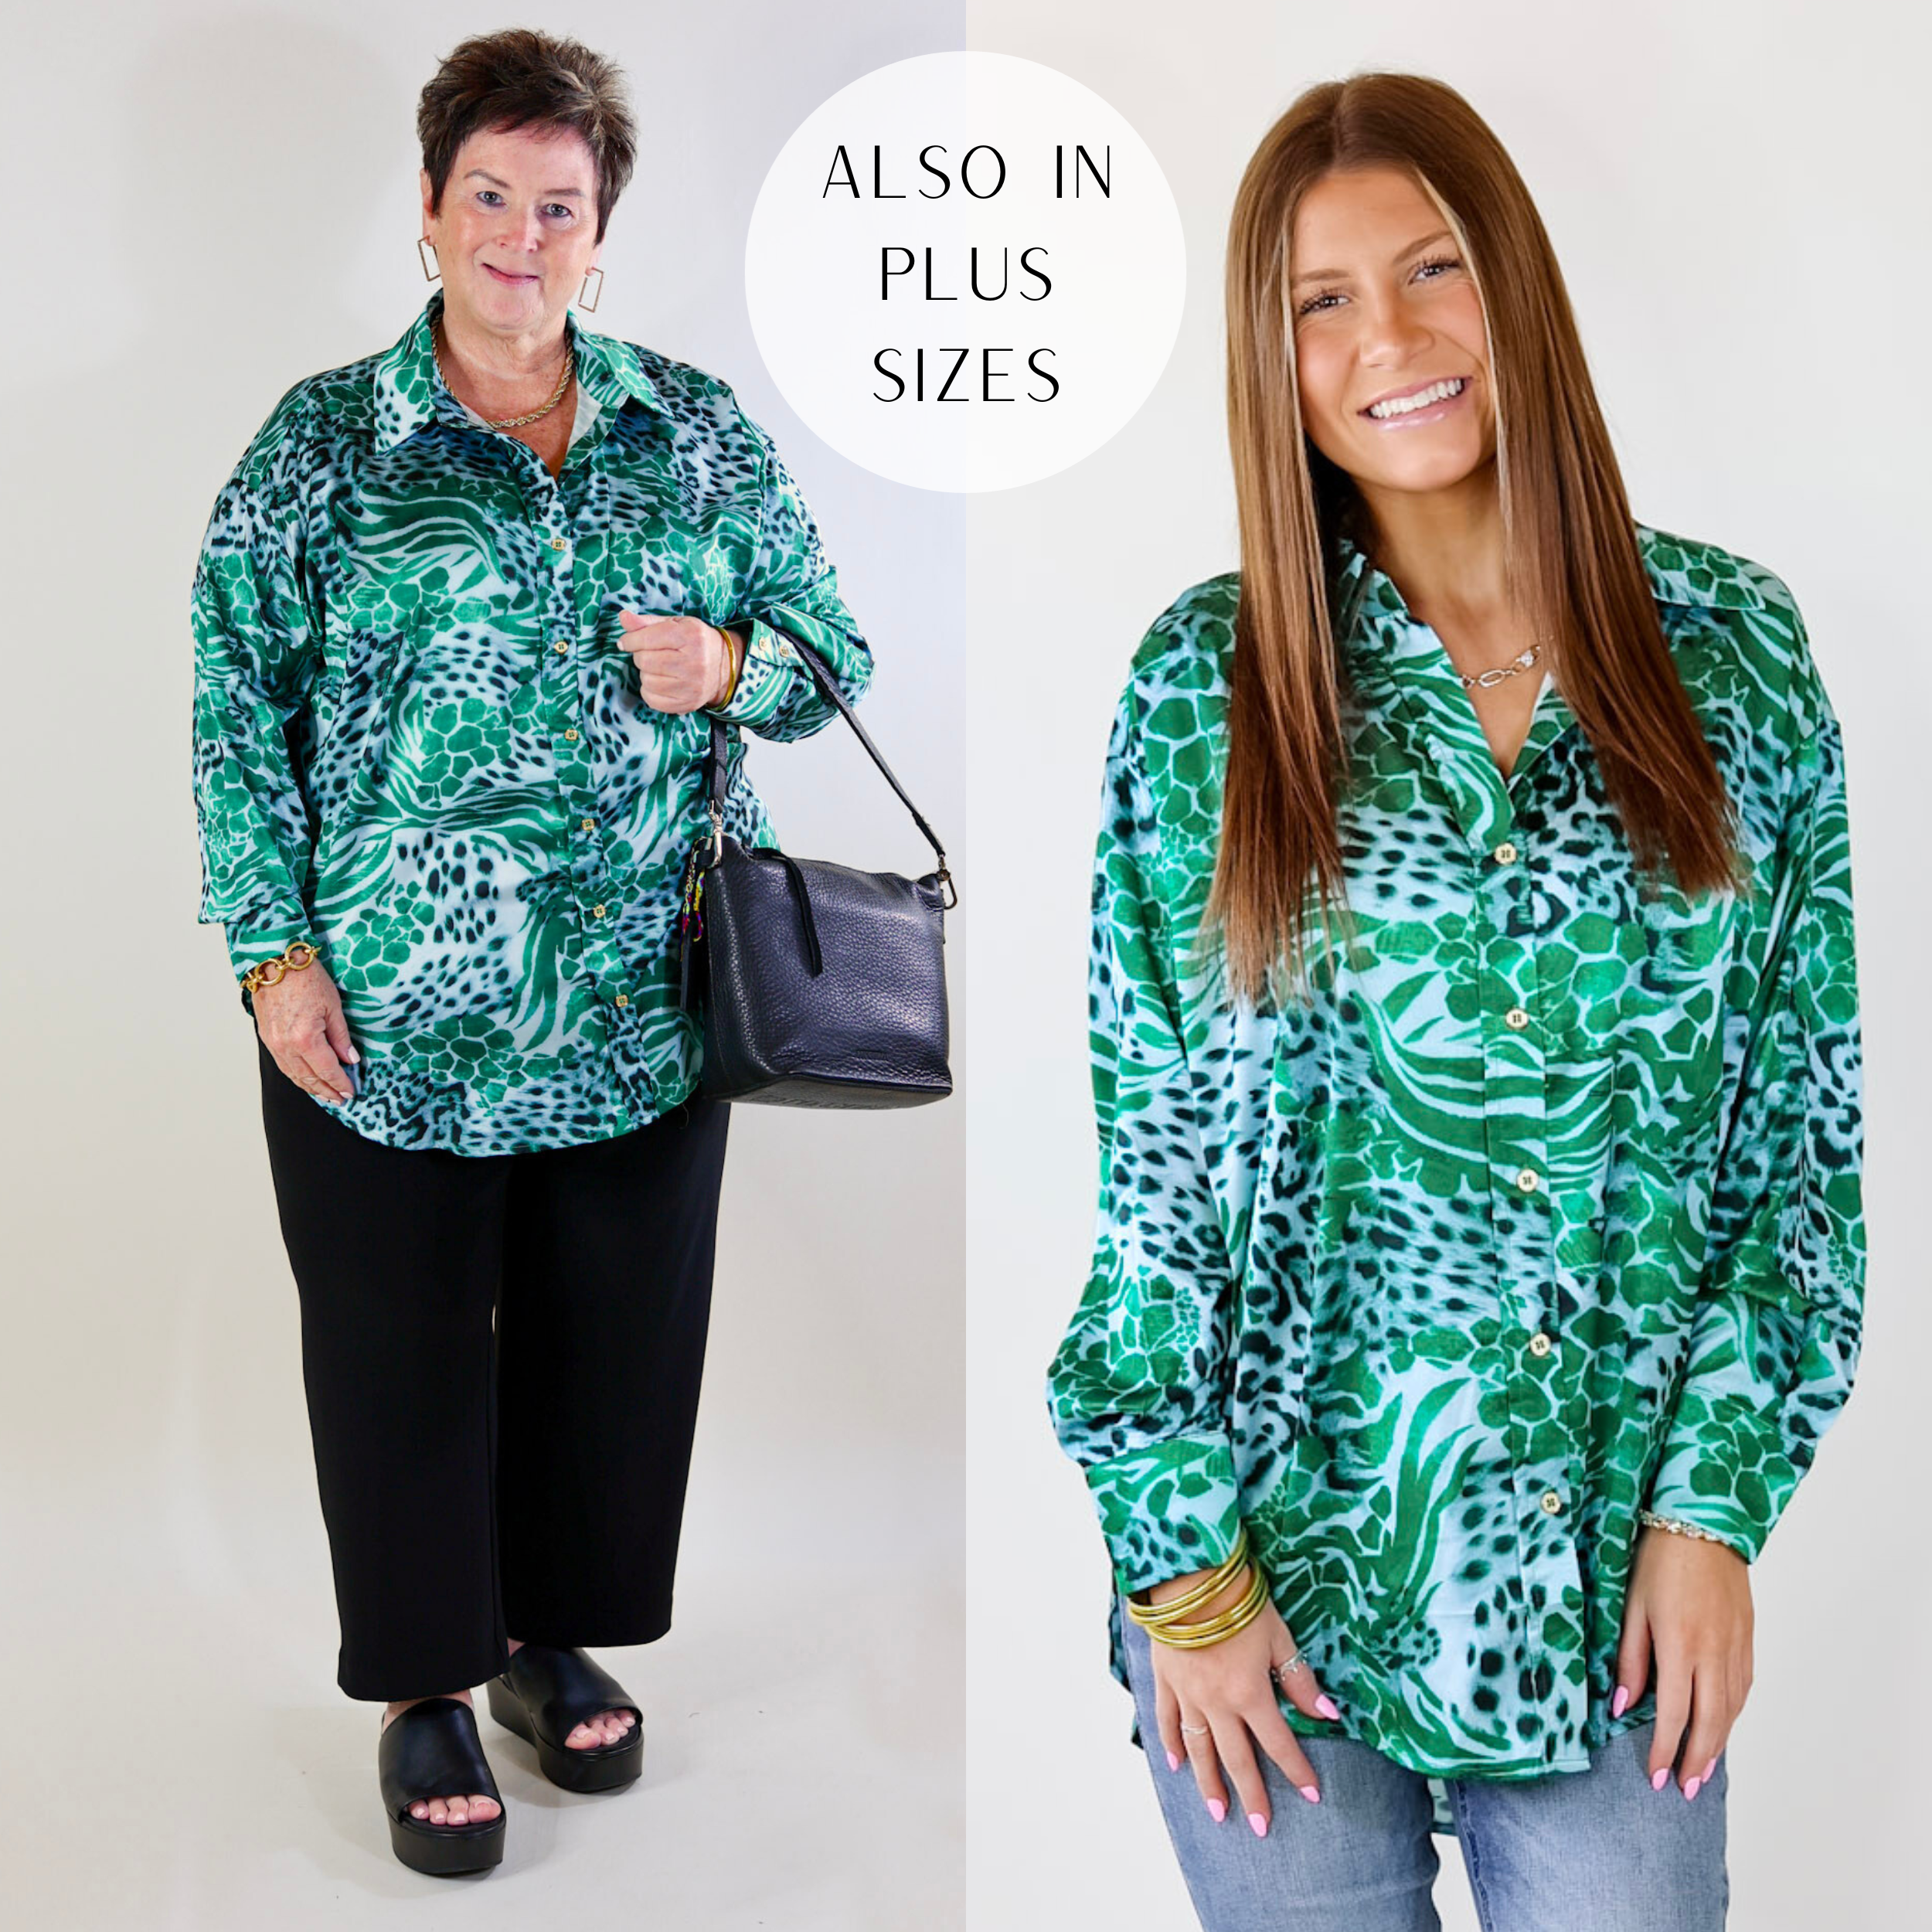 Models are wearing a green button up with multiple animal prints in multiple shades of green. Size small Model has paired the shirt with light blue skinny jeans, black pointed booties, and gold jewelry. Size plus model has it paired with black pants, a black Evie Consuela bag, and gold jewelry. 